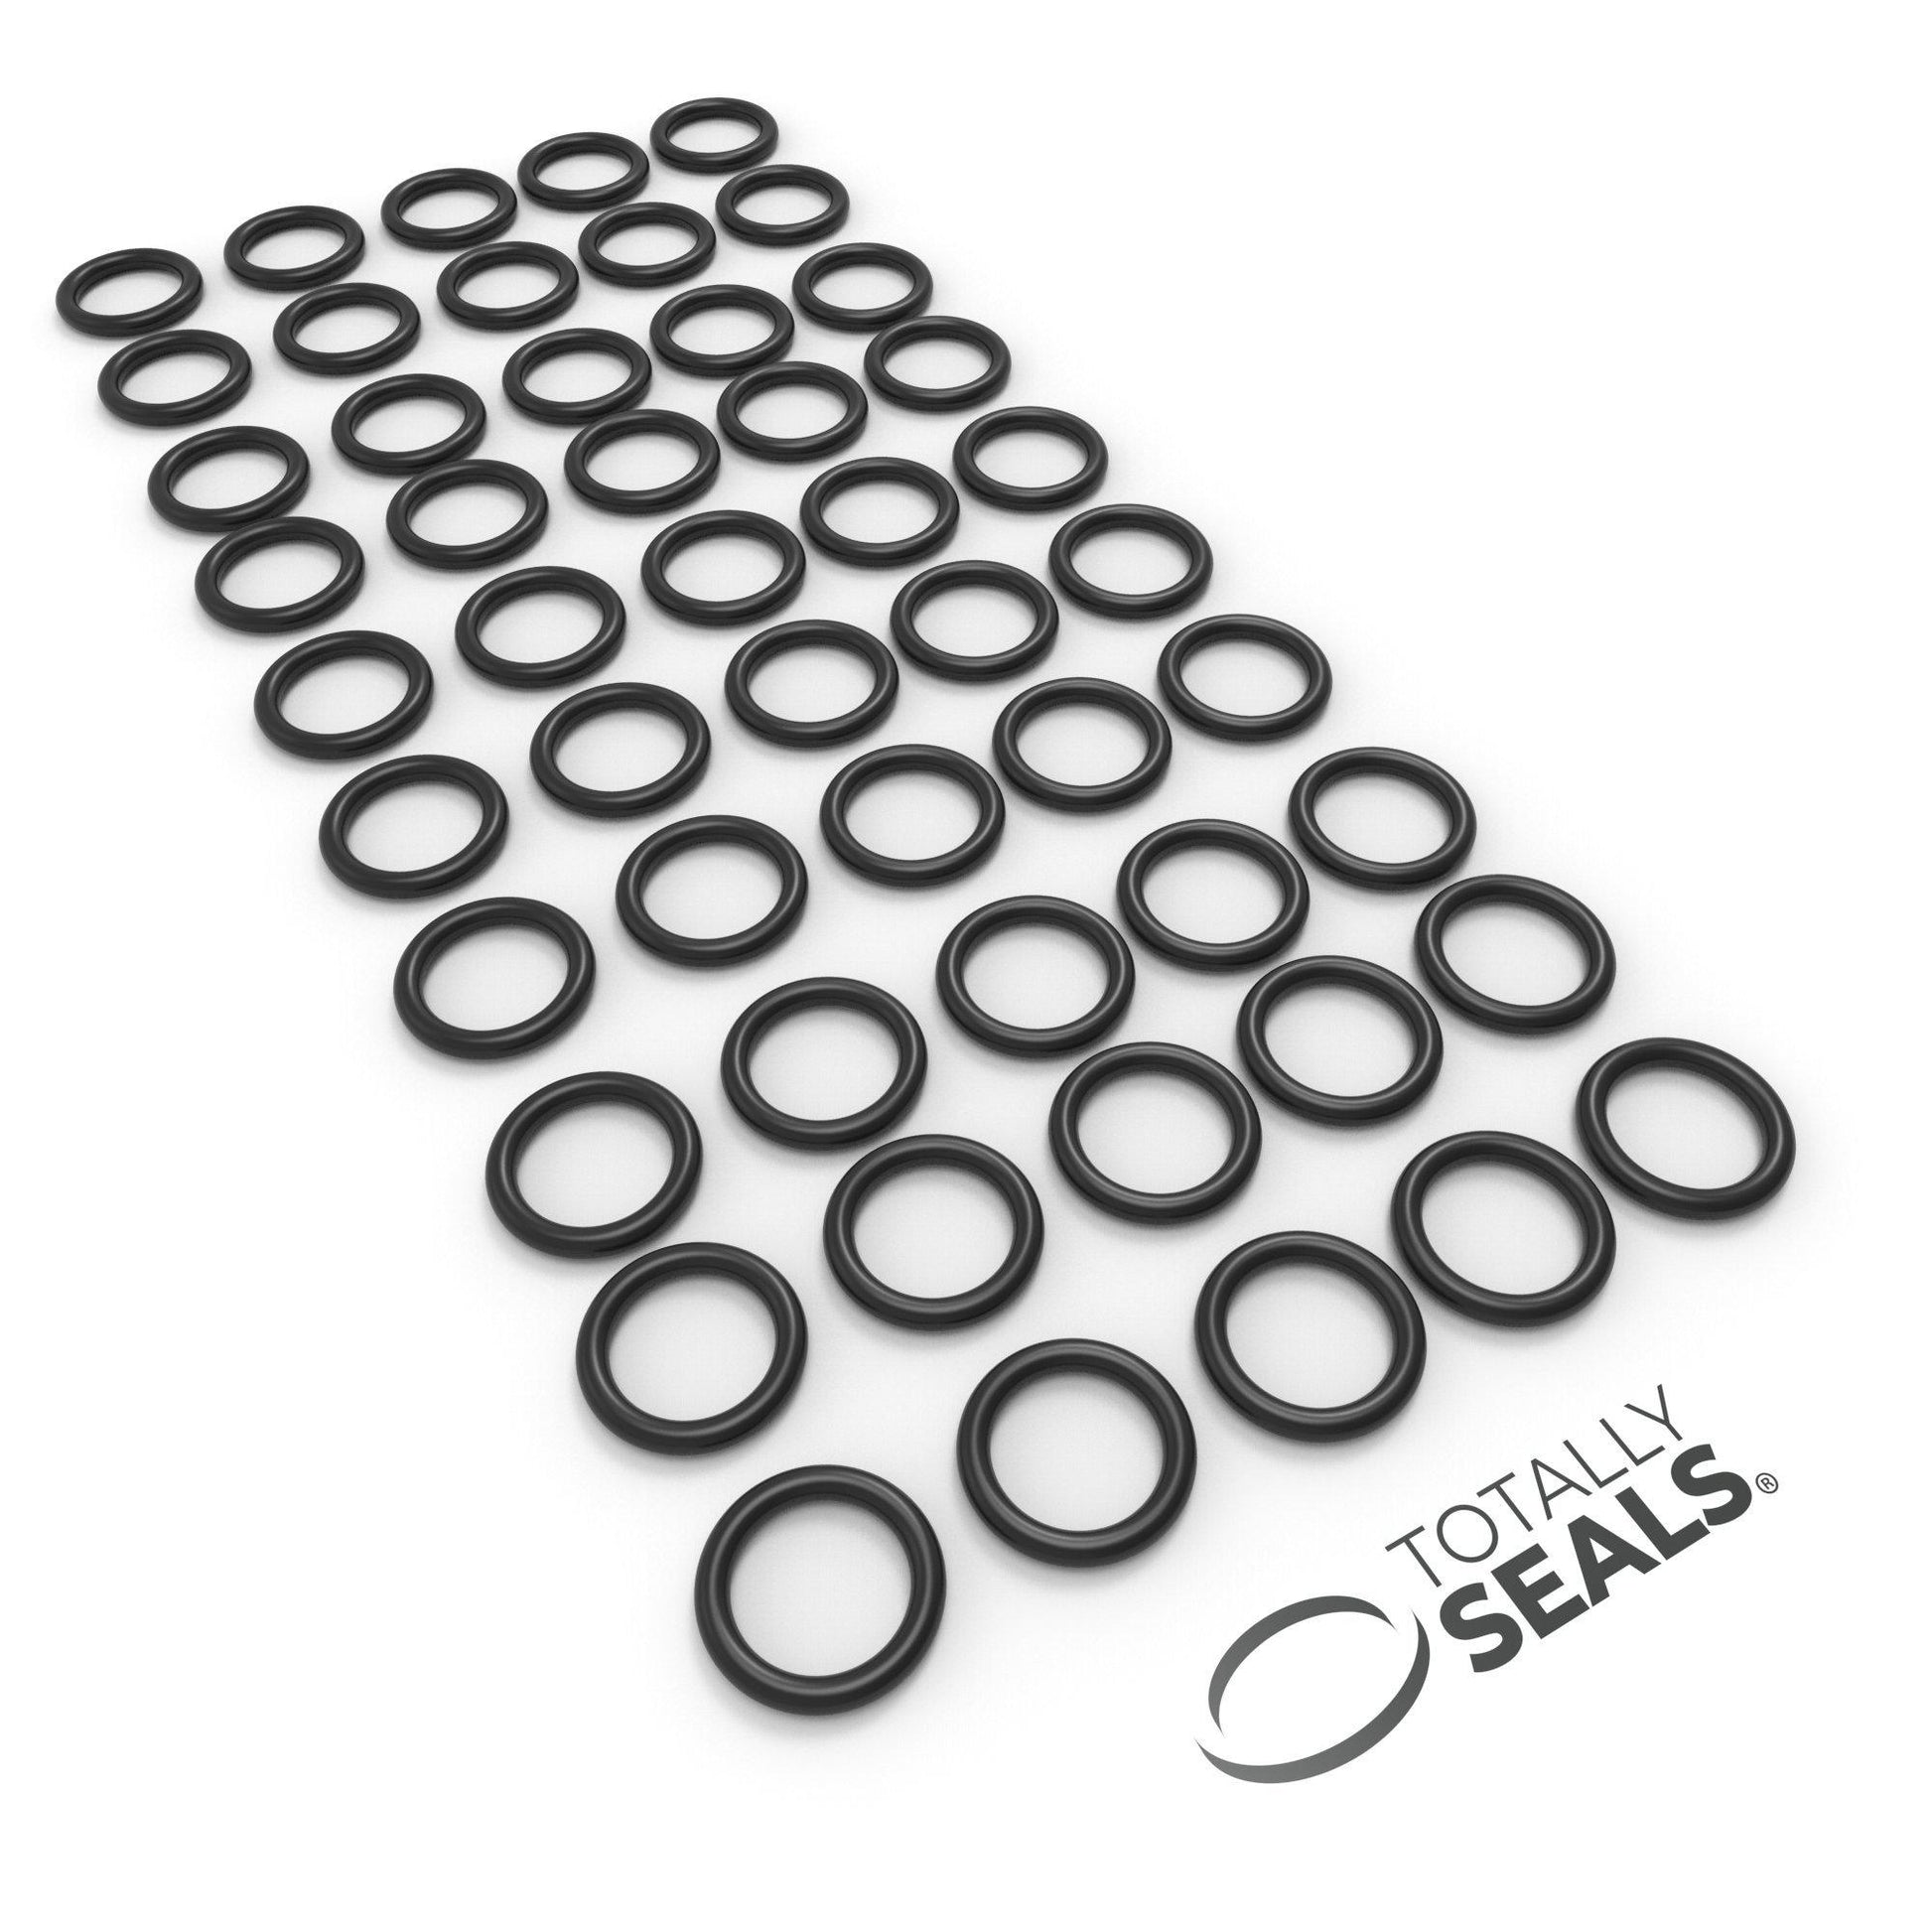 40mm x 2mm (44mm OD) Nitrile O-Rings - Totally Seals®